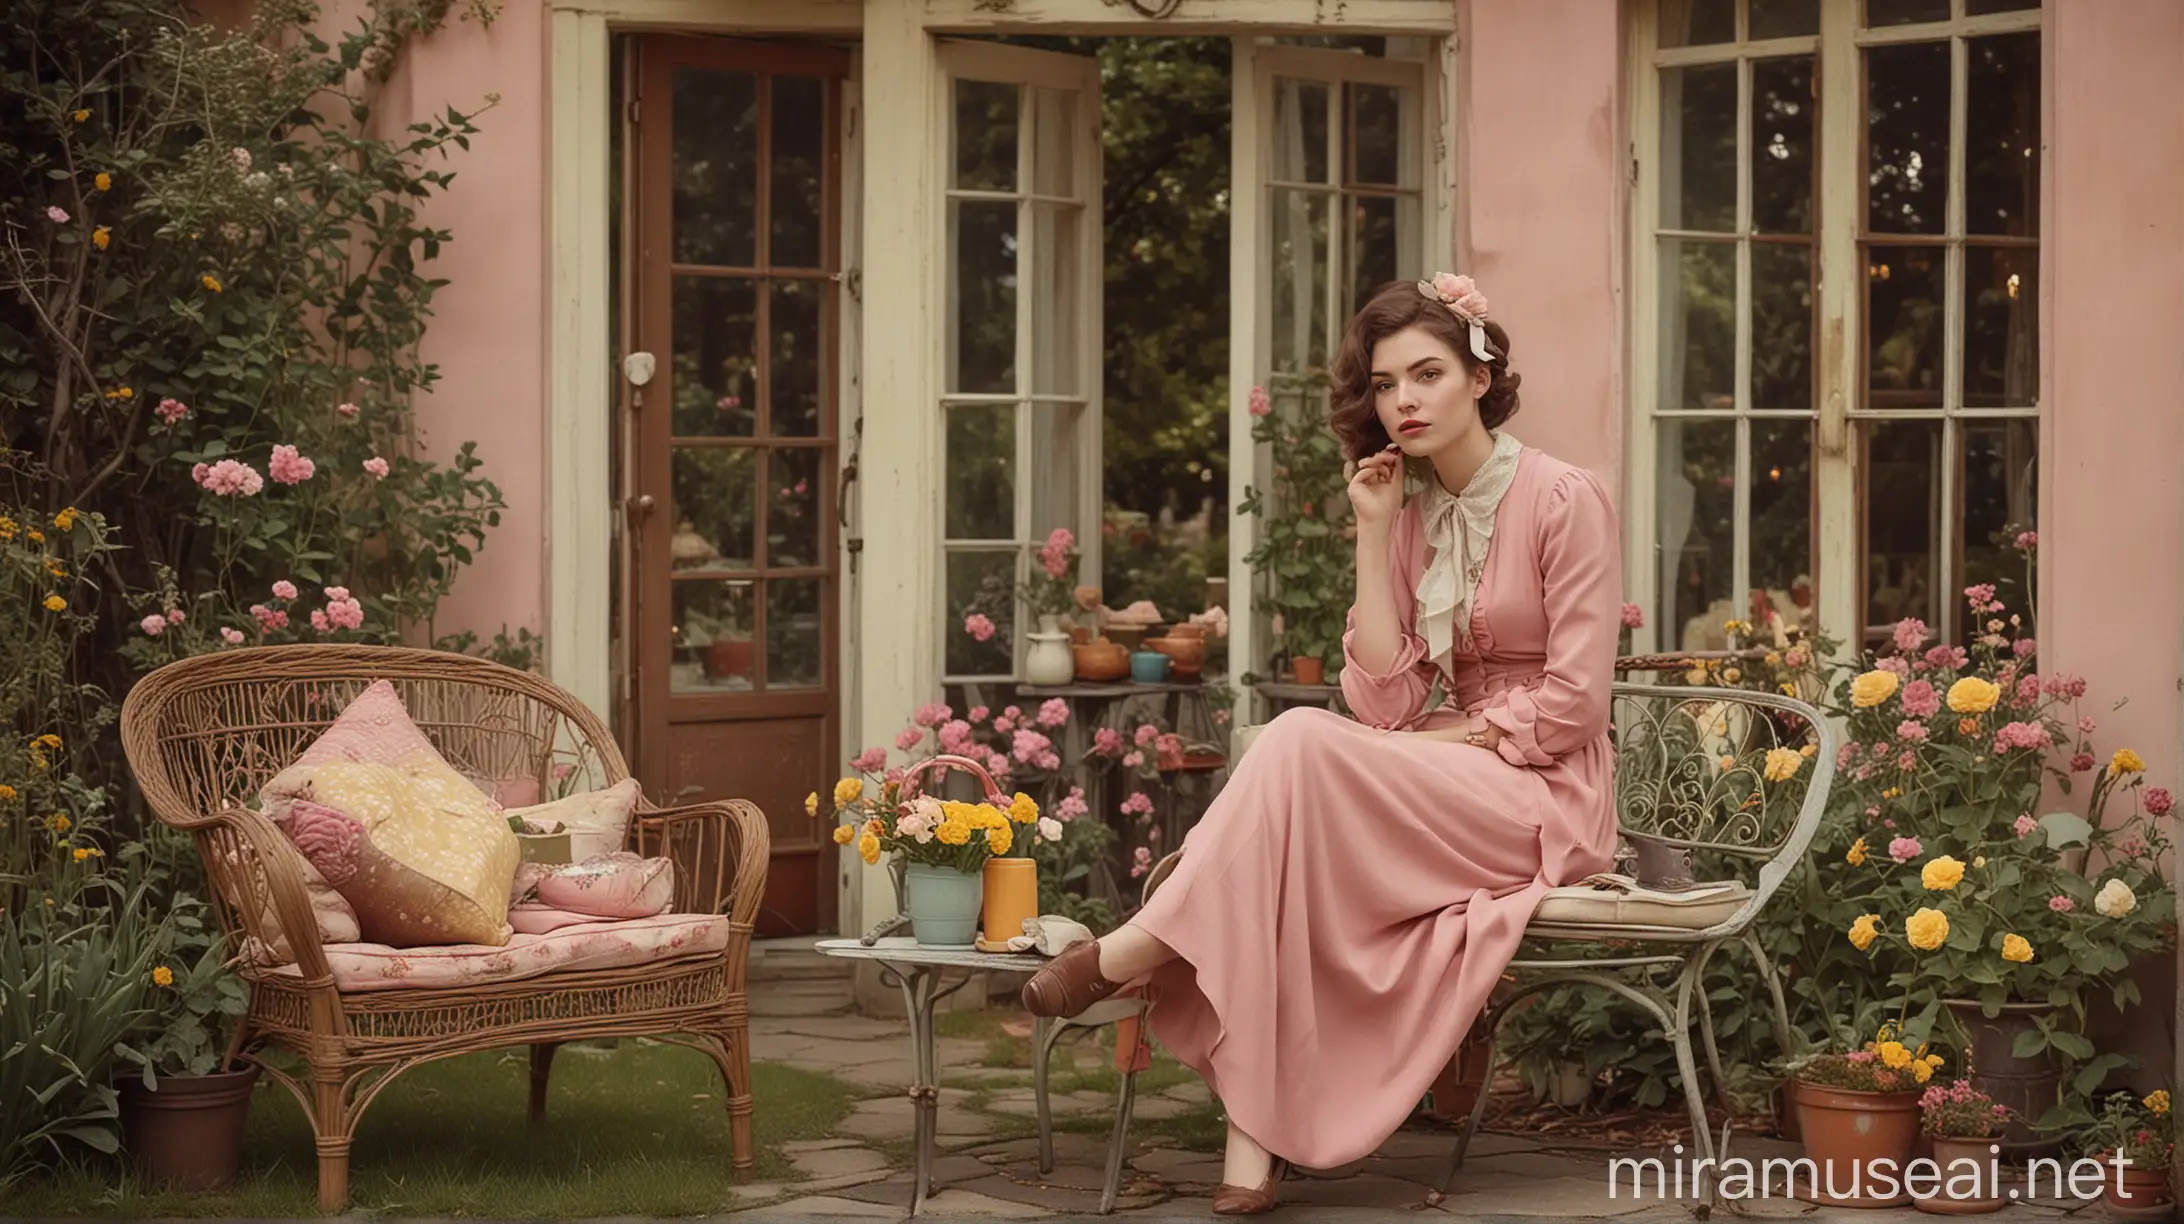 Create a scene of a lady in vintage style warm dressed in old vintage brown color, in back yard detailed and colorful items. The setting should use a pastel color palette featuring soft pinks, pale yellows, and light blues. She is sitting somewhere thinking and wondering, unaware of being photographed. The composition should be slightly off-center and dynamic, Add retro elements and whimsical details to evoke a vintage, nostalgic atmosphere with a mix of melancholy and whimsy.